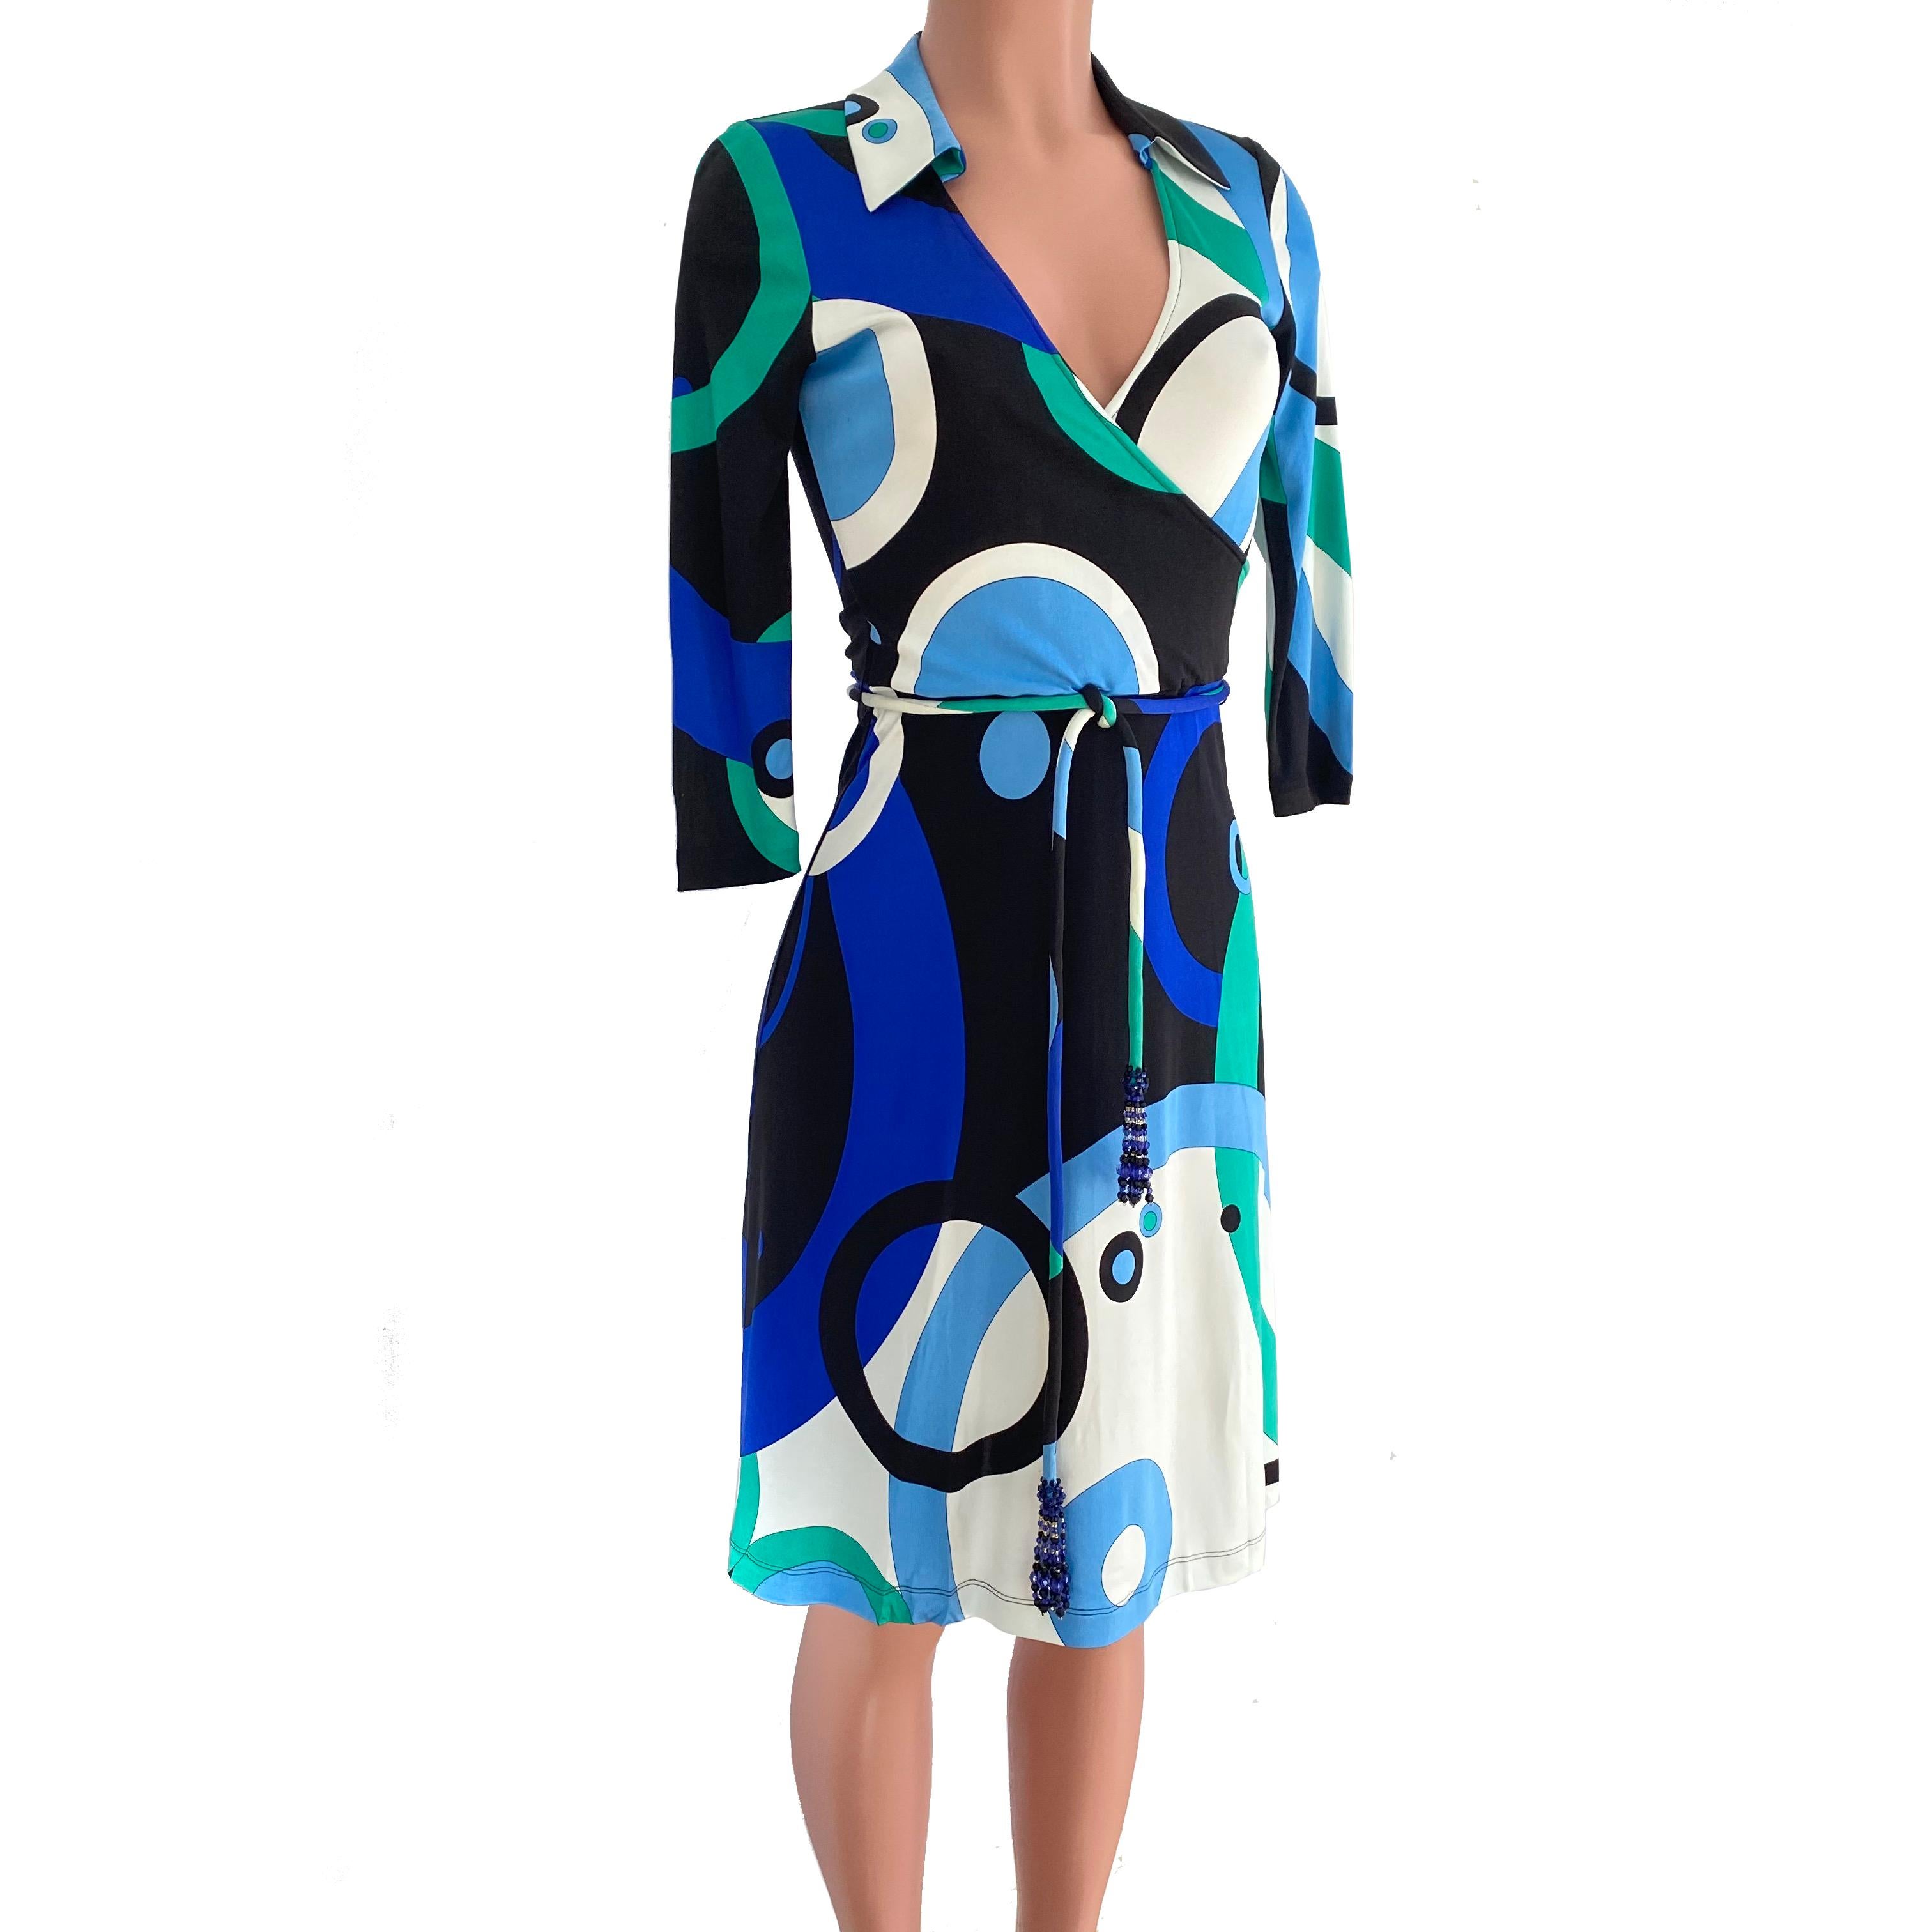 Mock wrap Shirt-collar dress with A-line skirt and 3/4 sleeves.
Original blue galaxy print from Flora Kung.
Detachable cord belt with blue beads–can be switched to a day belt for a more casual look.
US 6 = UK 10 = French 38
Condition: Pristine.